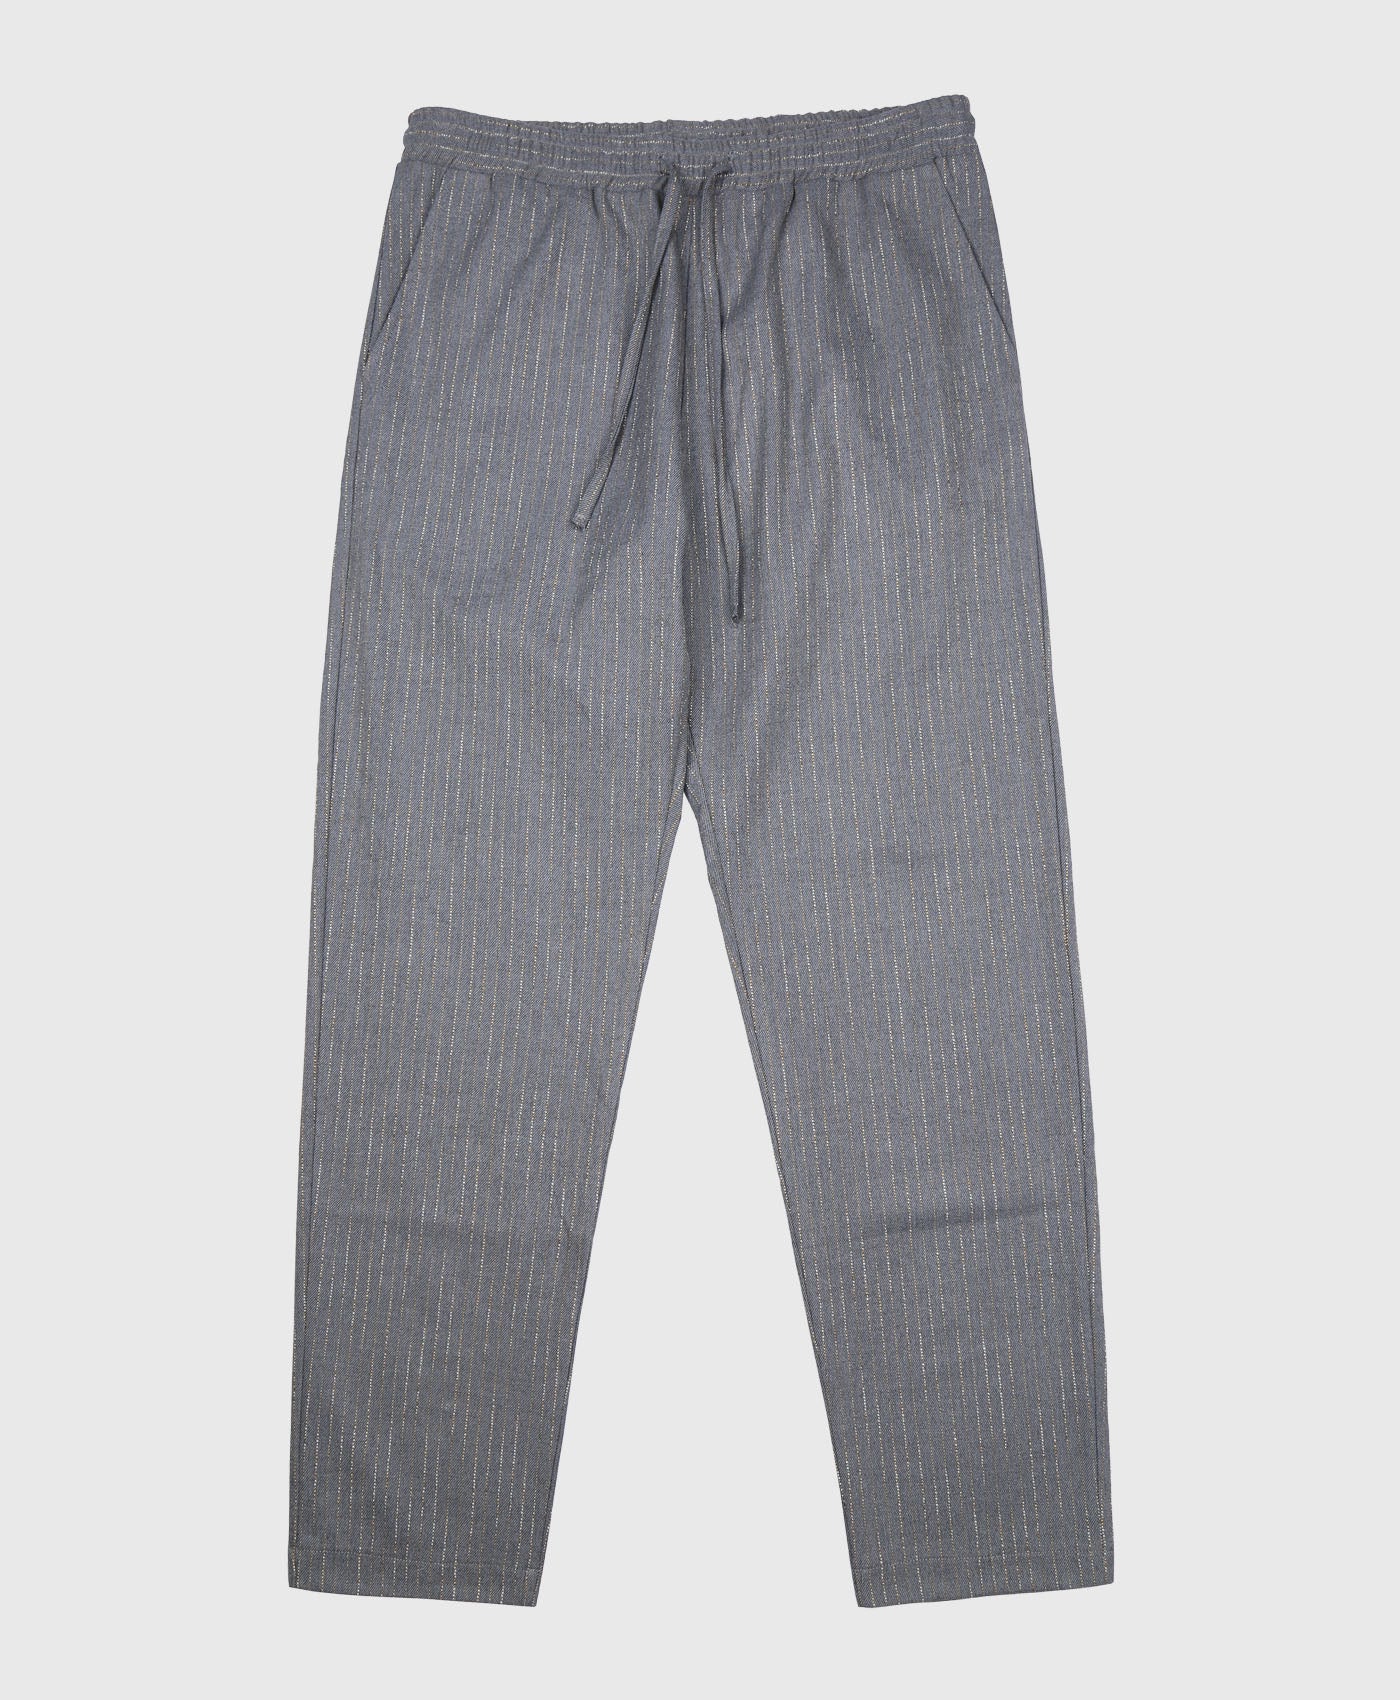 Tapered Fit Elasticated Waist Smart Trouser In Charcoal Pinstripe